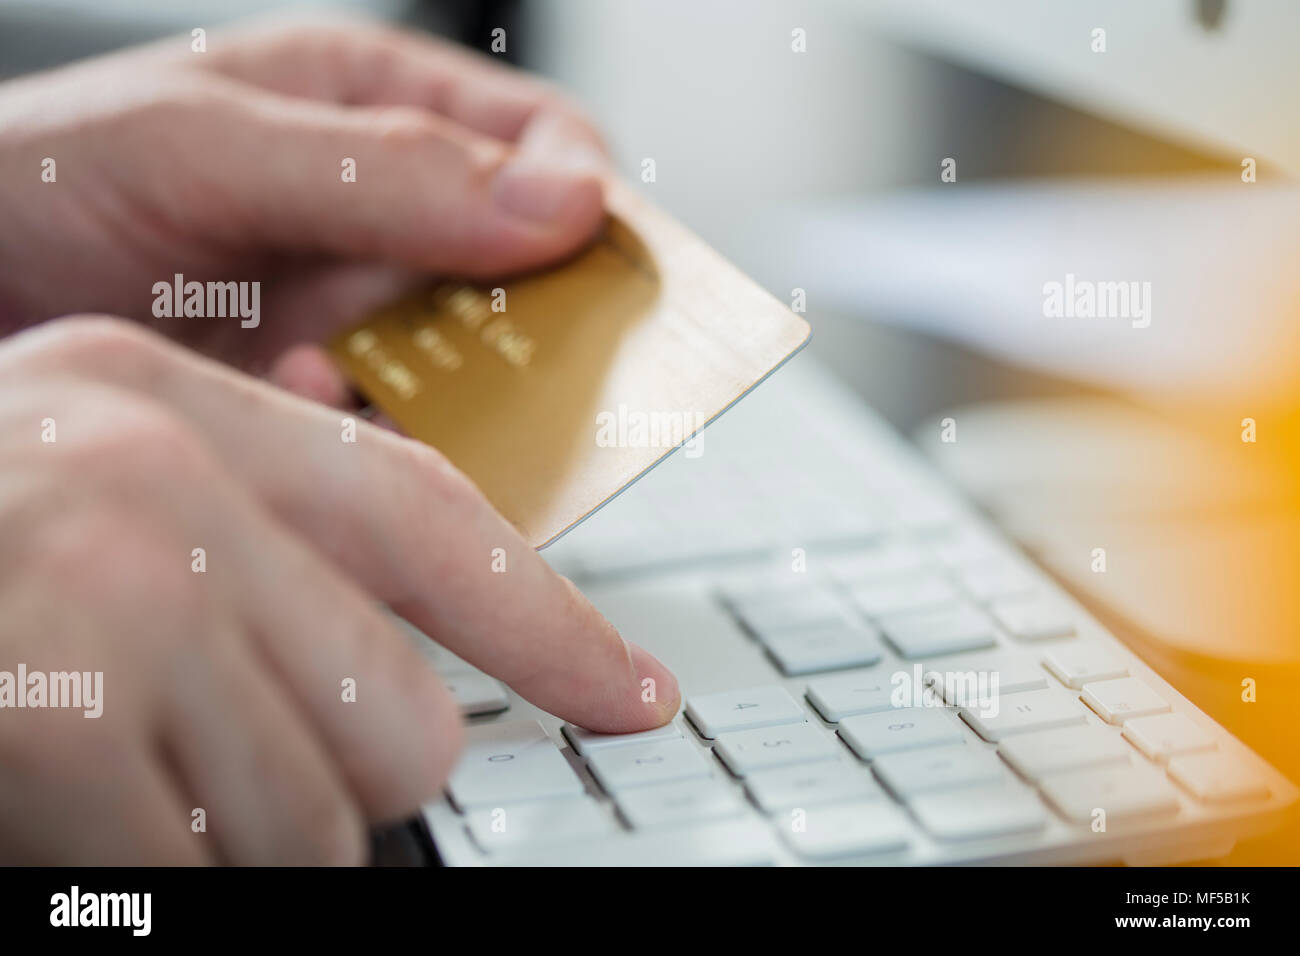 Man making online payment with credit card, close-up Stock Photo